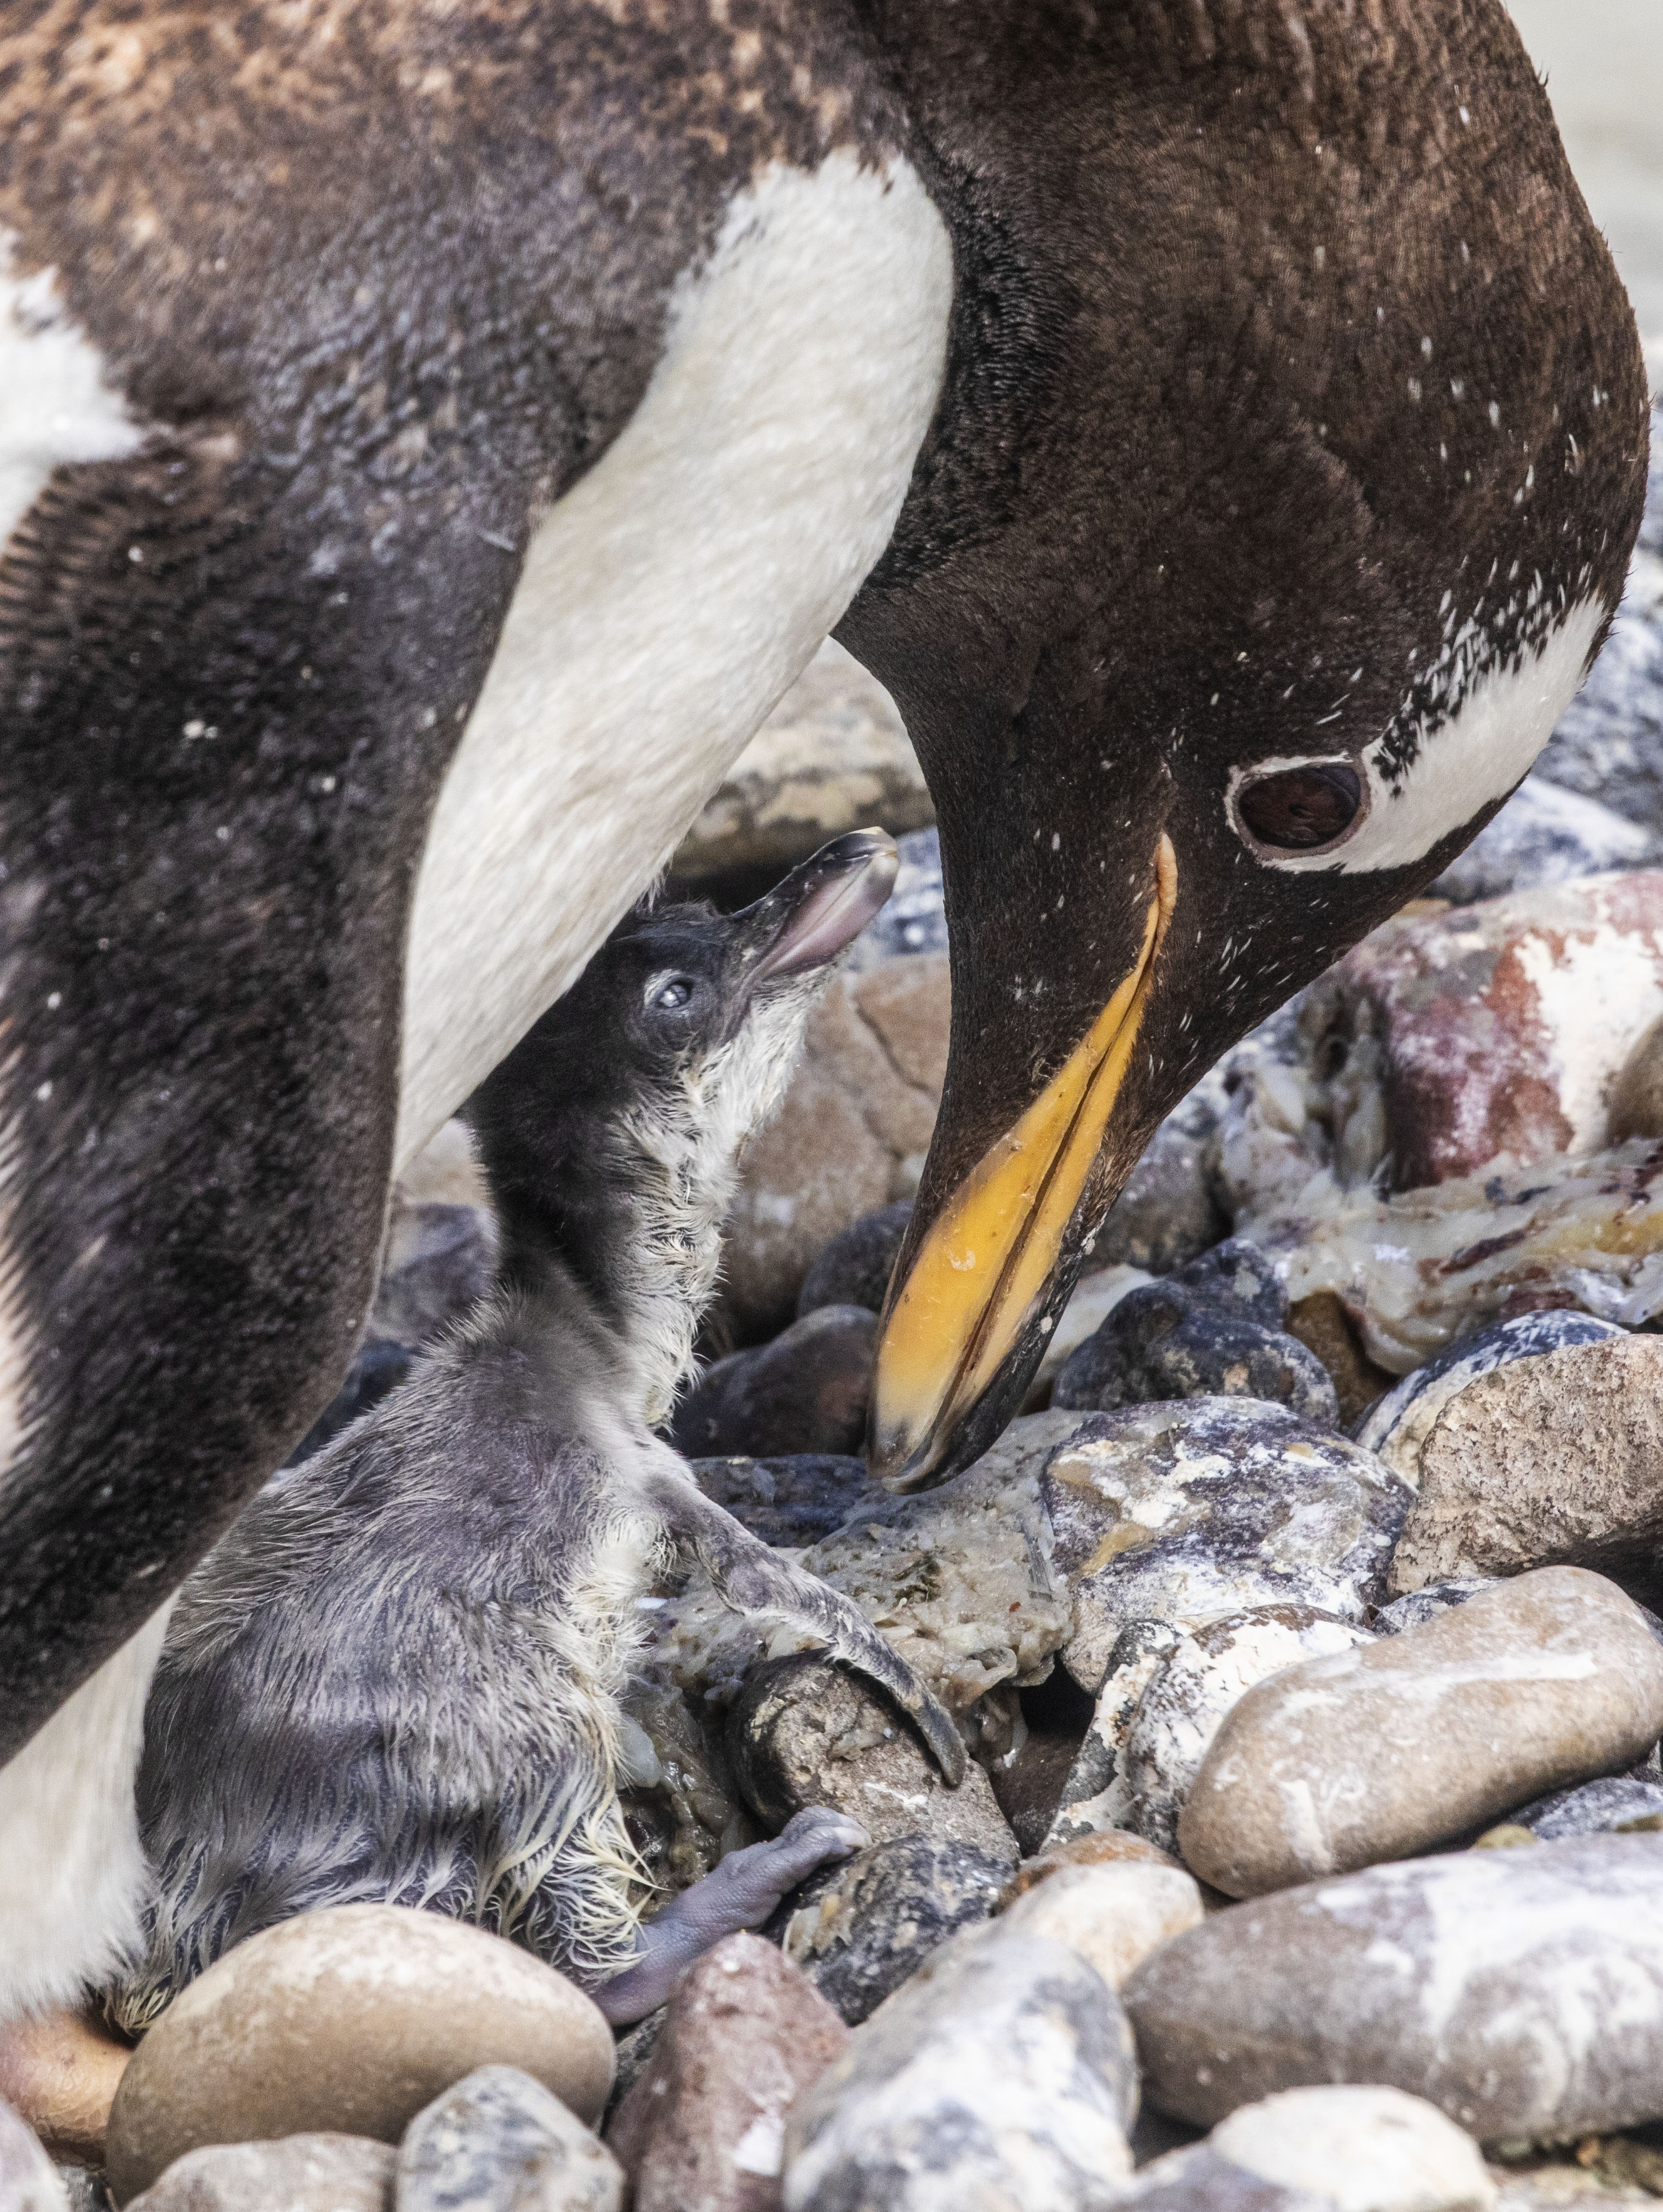 Ten gentoo penguin chicks have emerged so far at Edinburgh Zoo and keepers at the wildlife conservation charity are hopeful more will follow in the coming weeks. Visitors are able to spot the chicks being cared for by their parents at the zoo’s Penguins Rock, the largest outdoor penguin pool in Europe